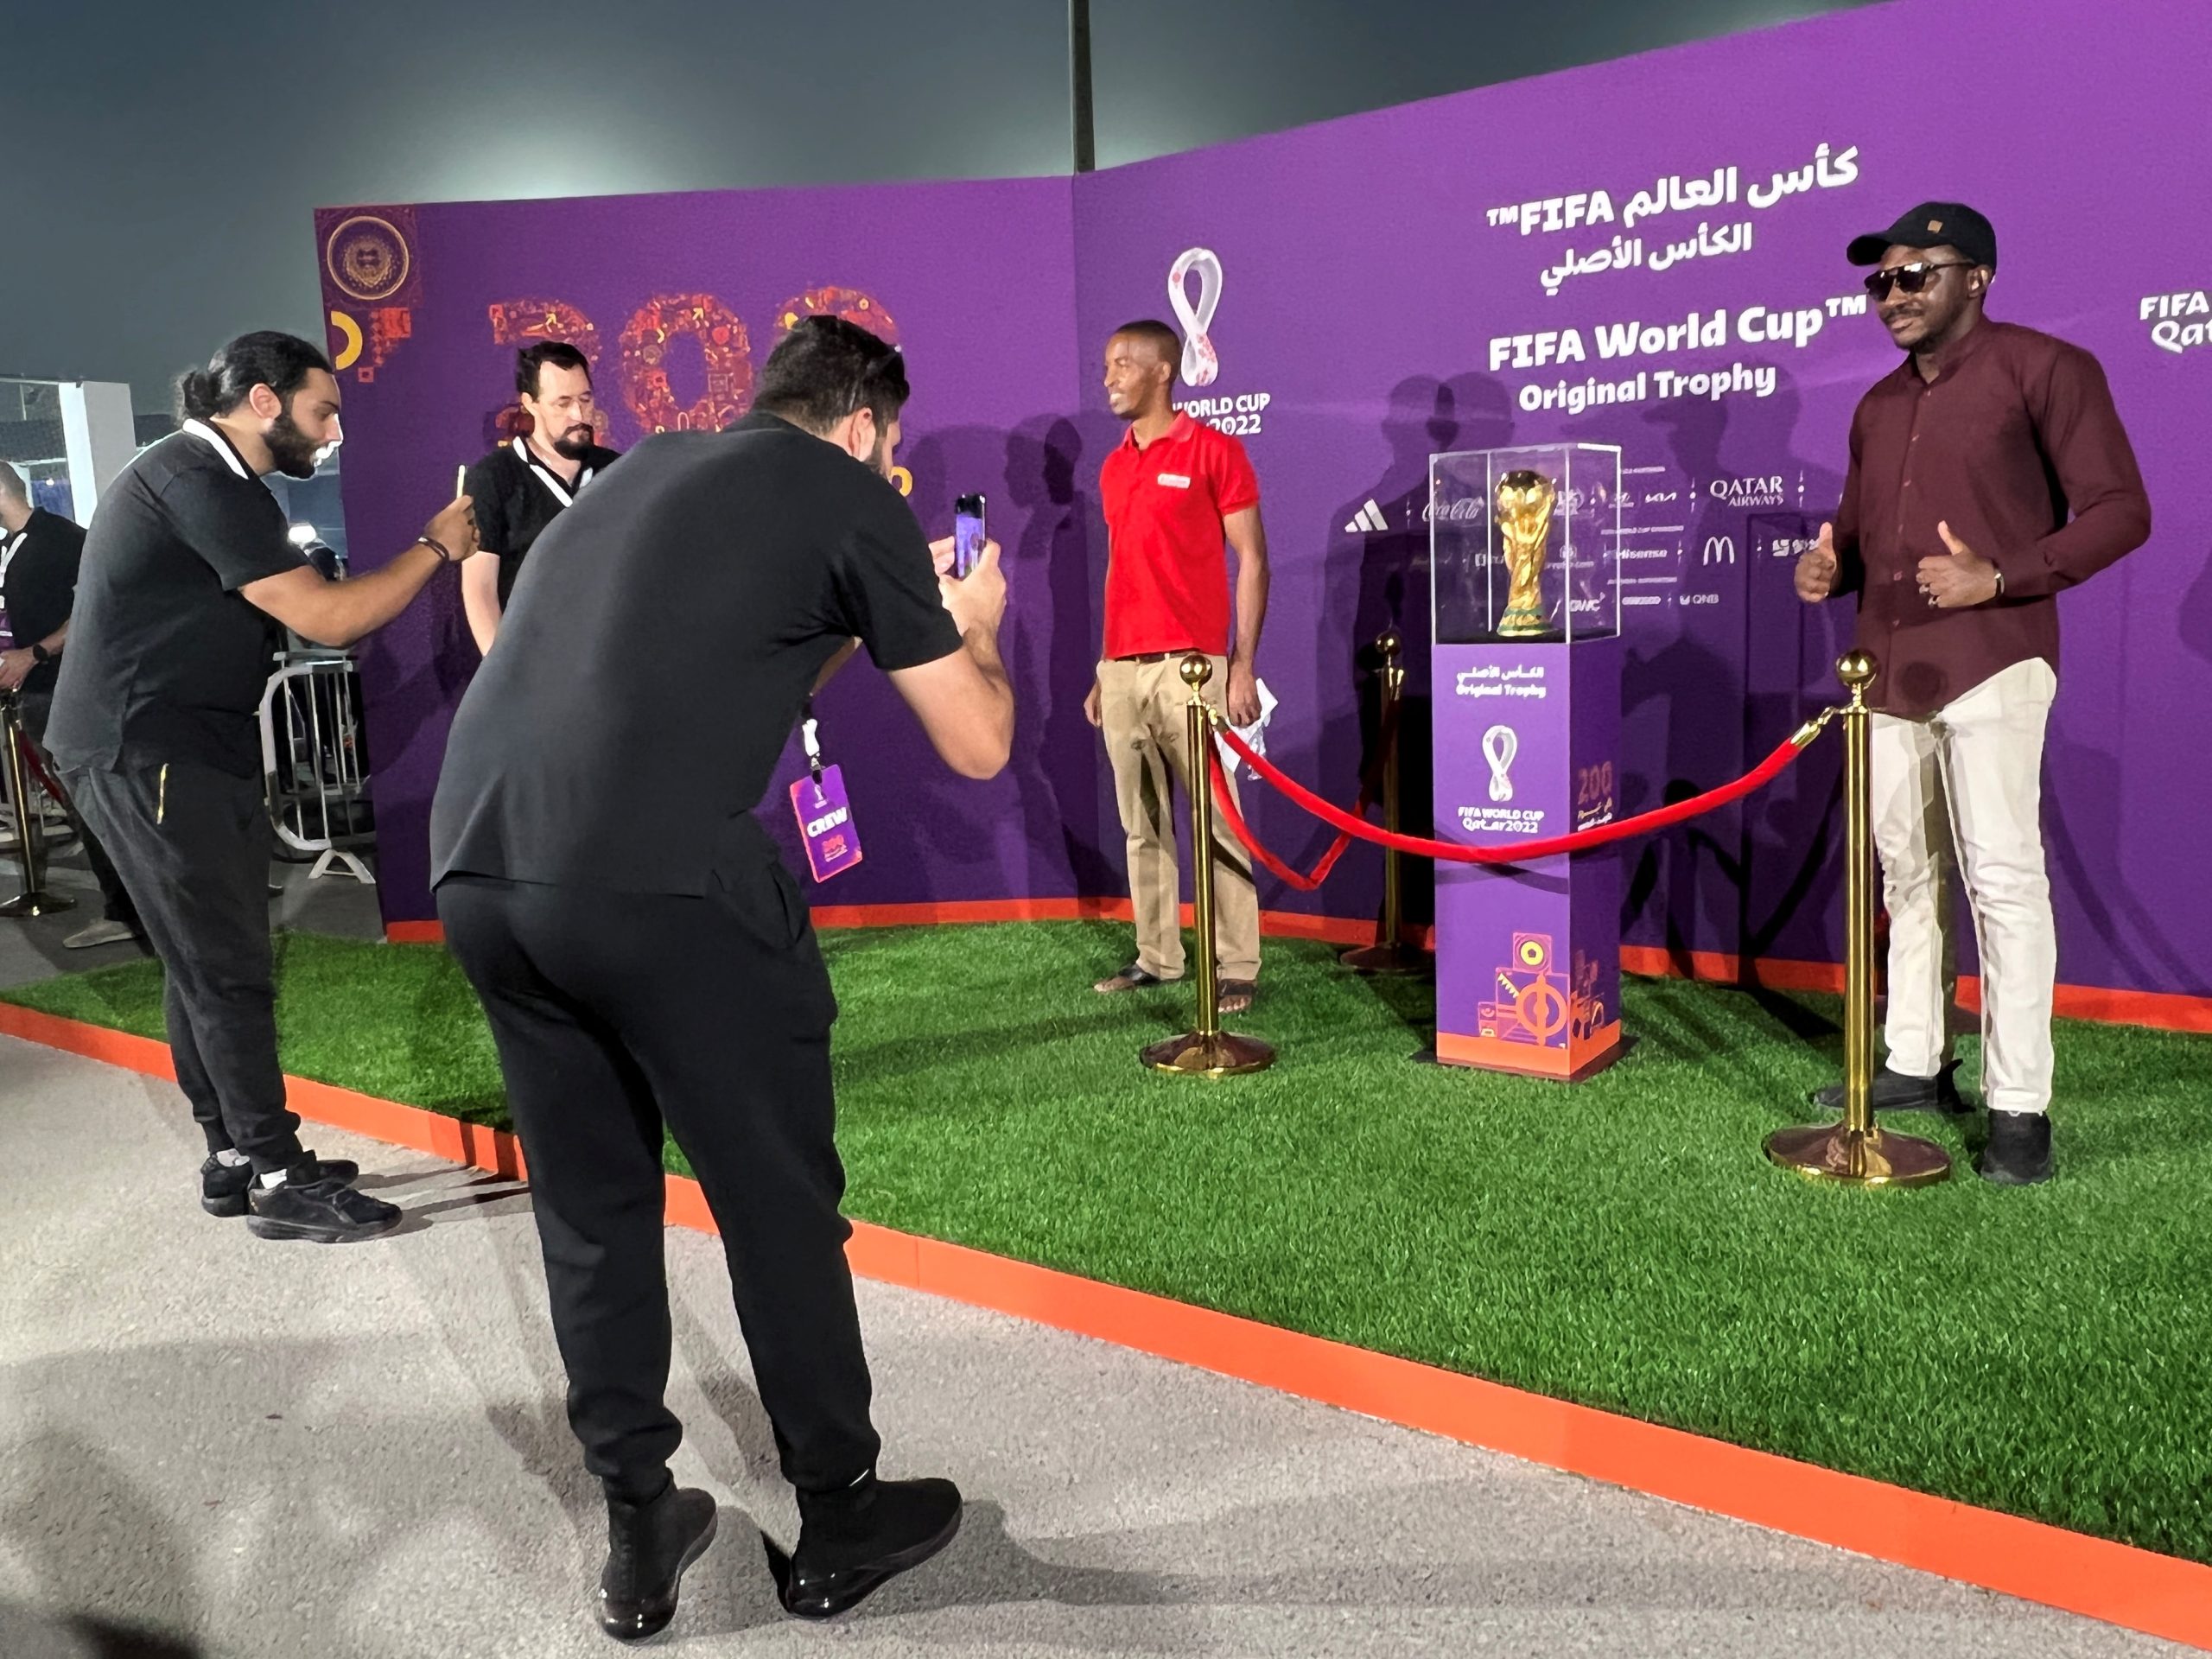 Hisense Becomes Official Sponsor of FIFA World Cup Qatar 2022(TM)